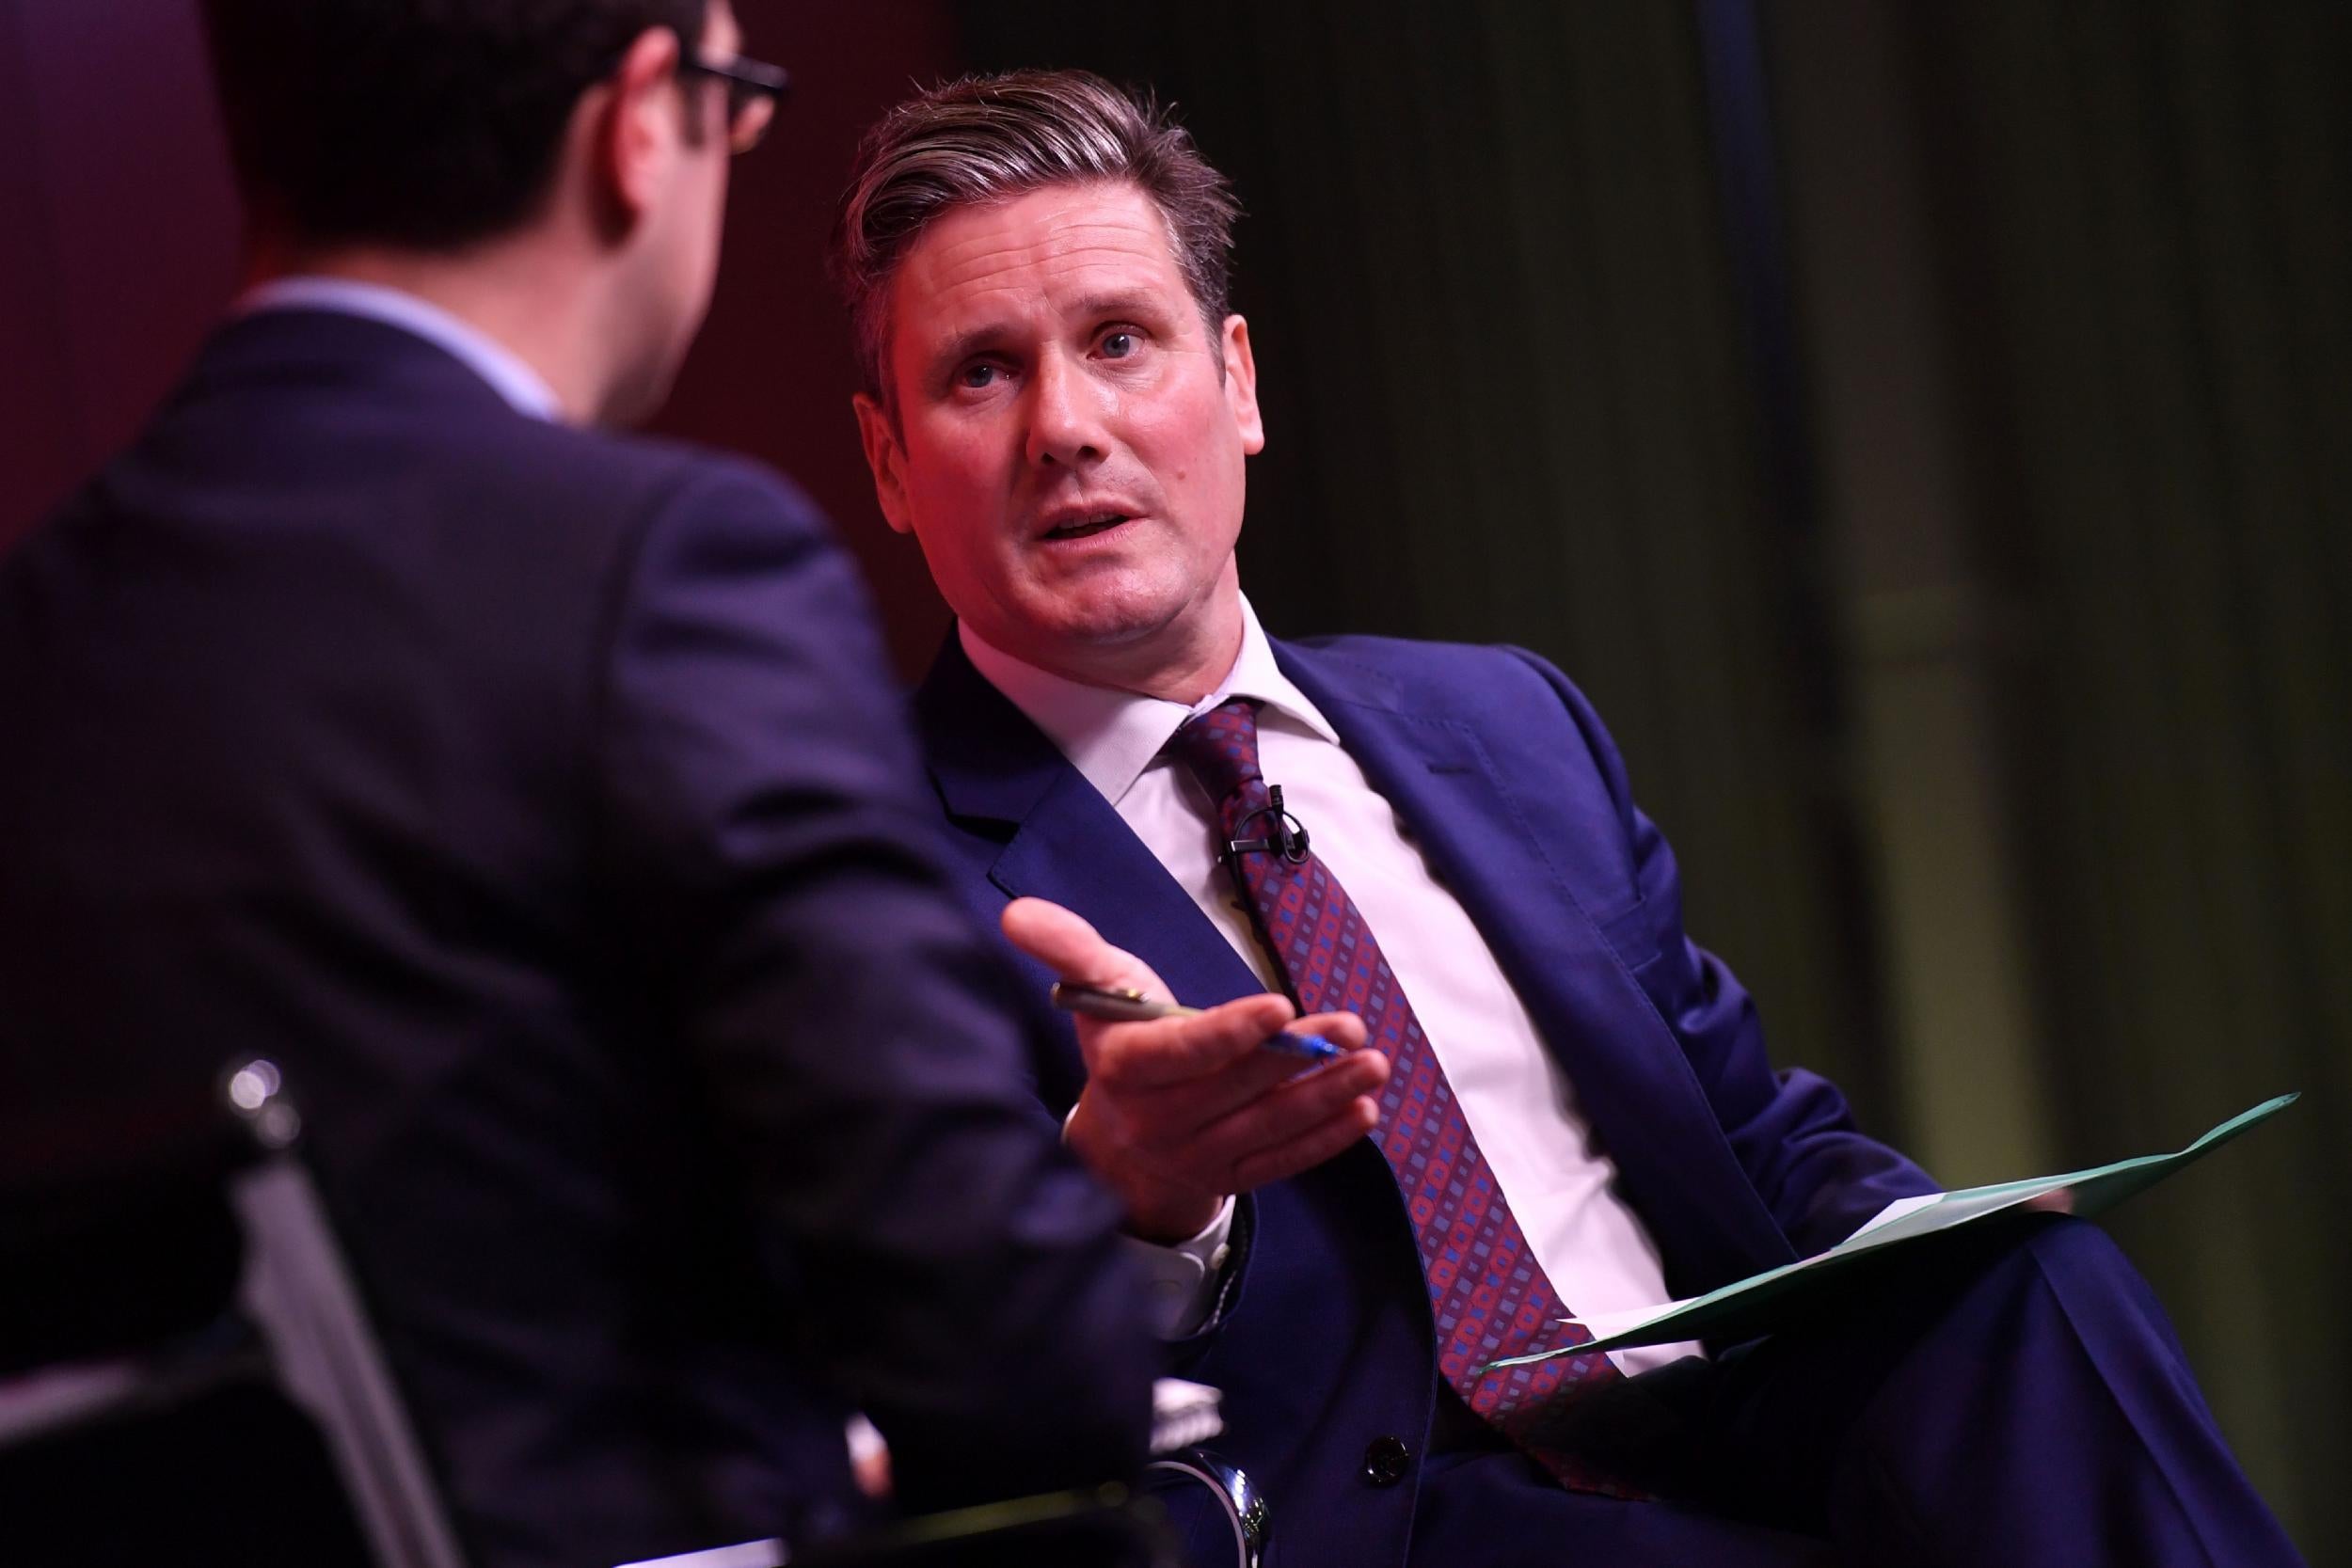 Shadow Brexit secretary Sir Keir Starmer will be well aware that his position on free movement means he would have to be prepared to see Britain leave the single market